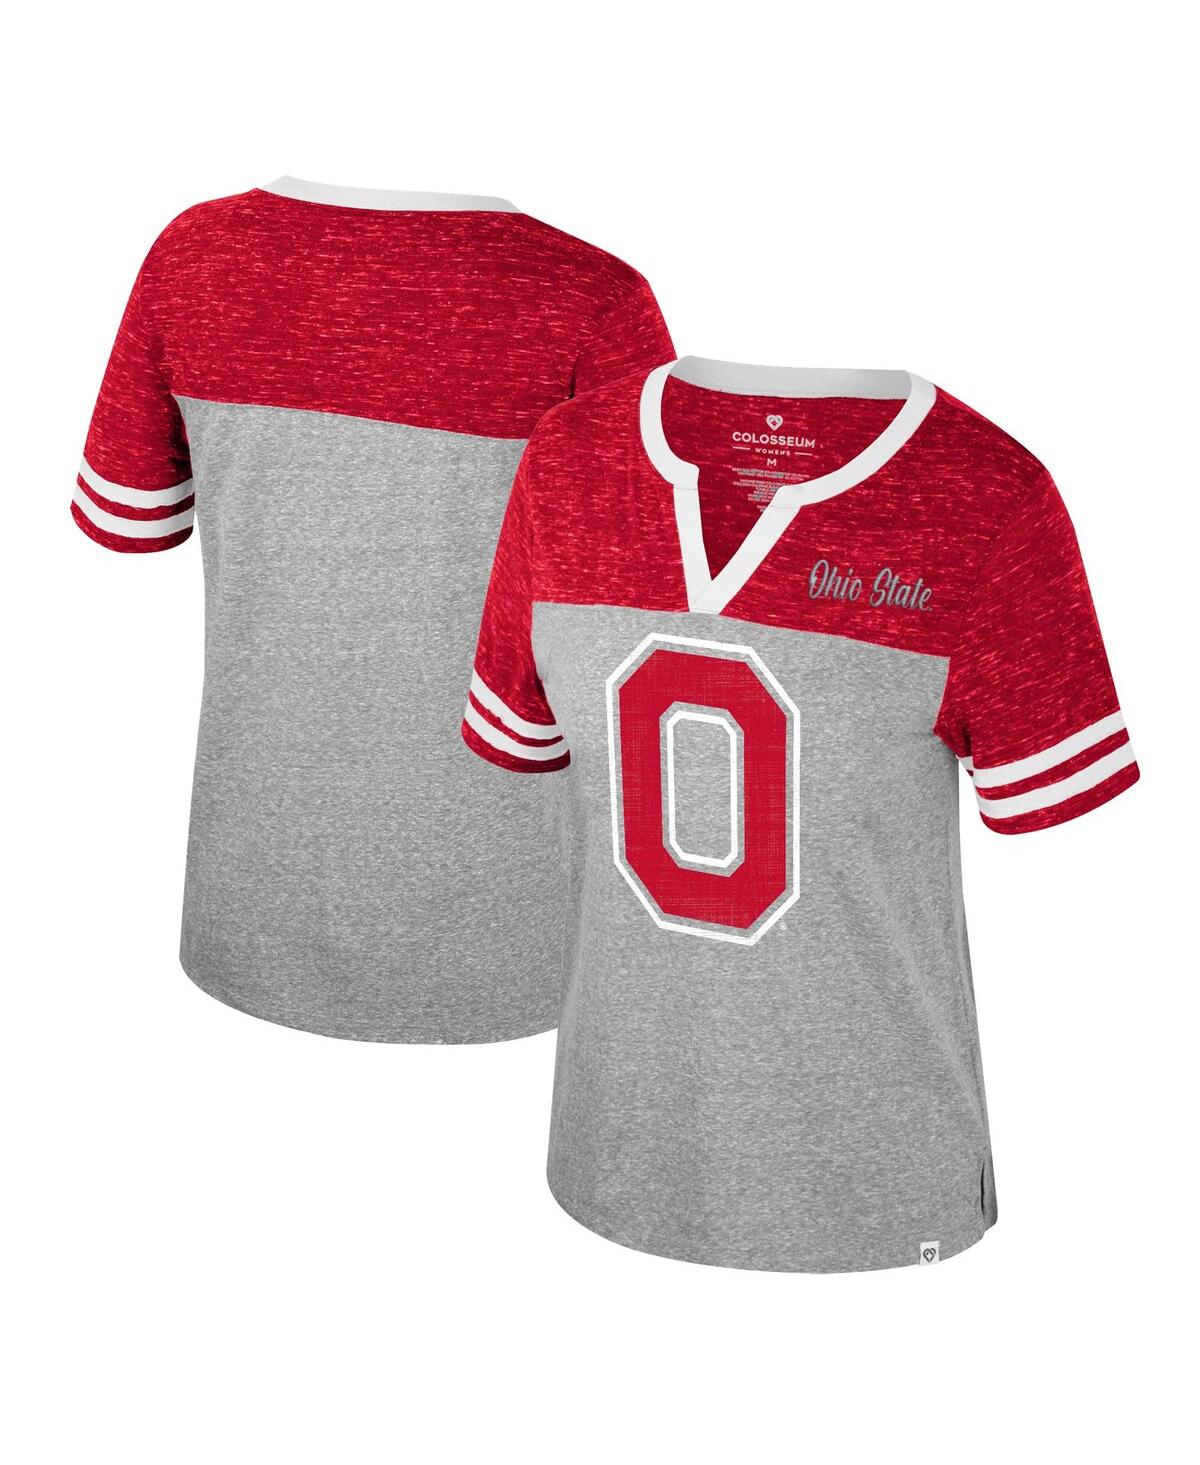 Shop Colosseum Women's  Heather Gray Ohio State Buckeyes Kate Colorblock Notch Neck T-shirt